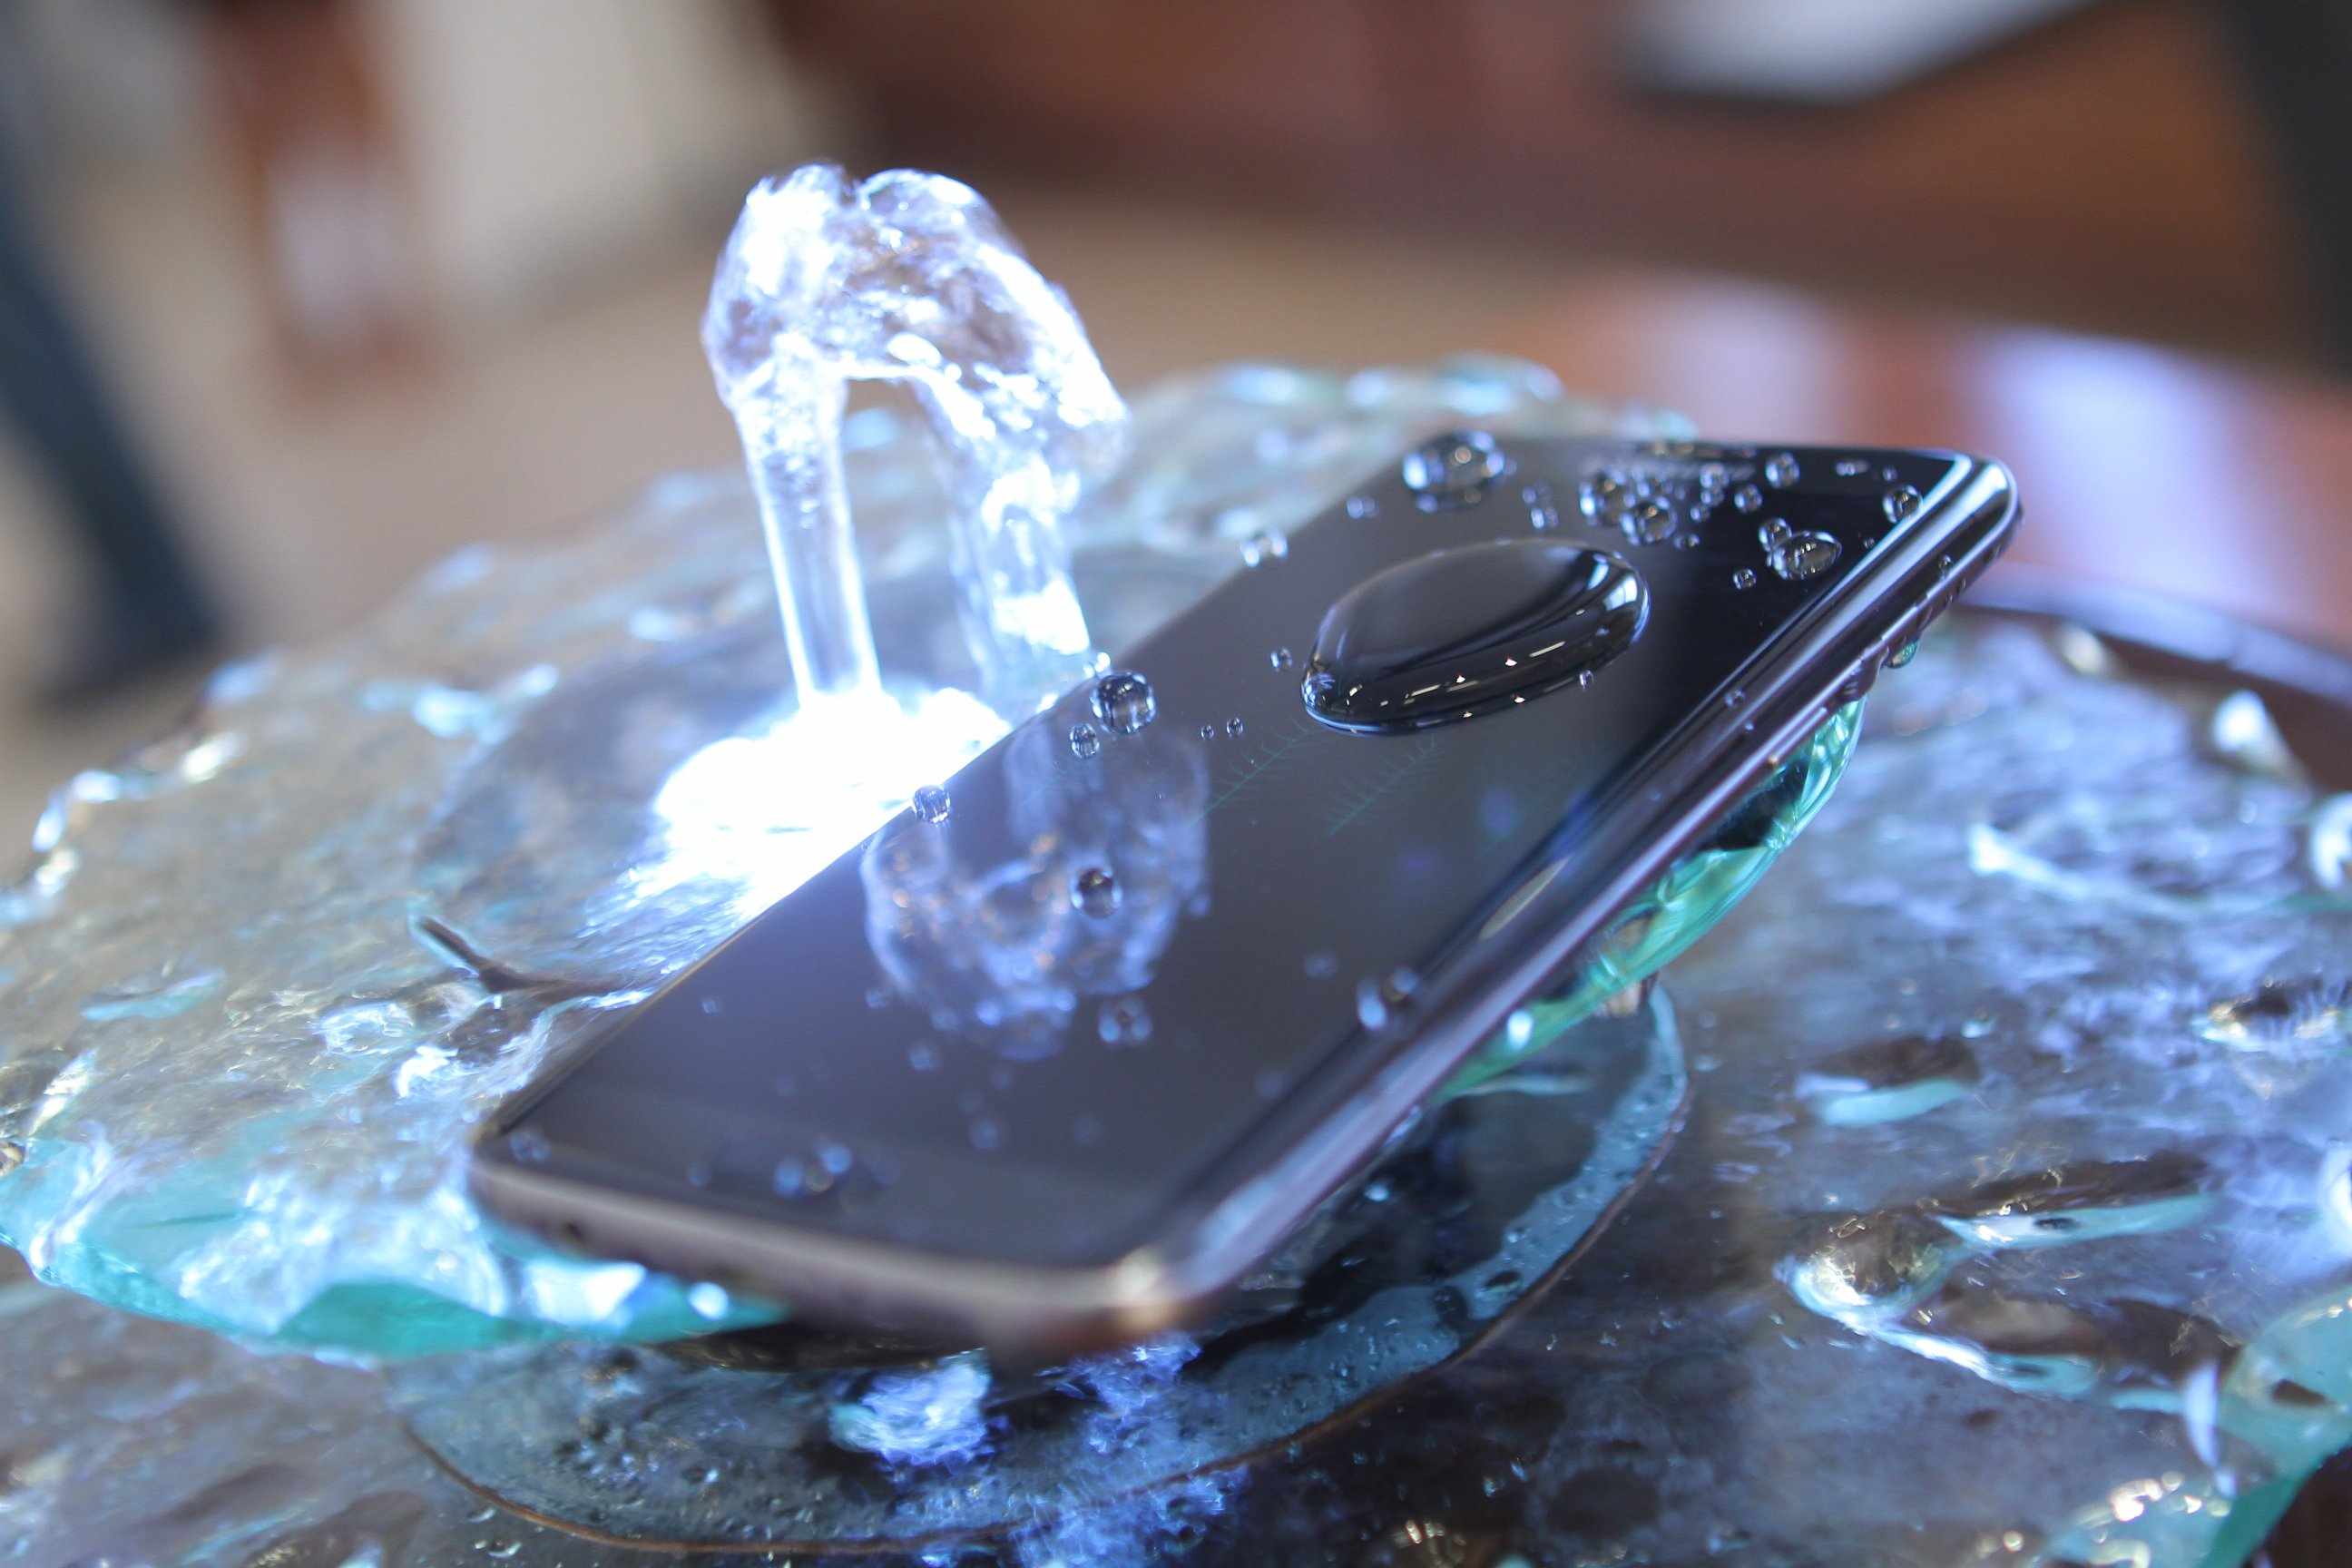 How to repair a water damaged phone